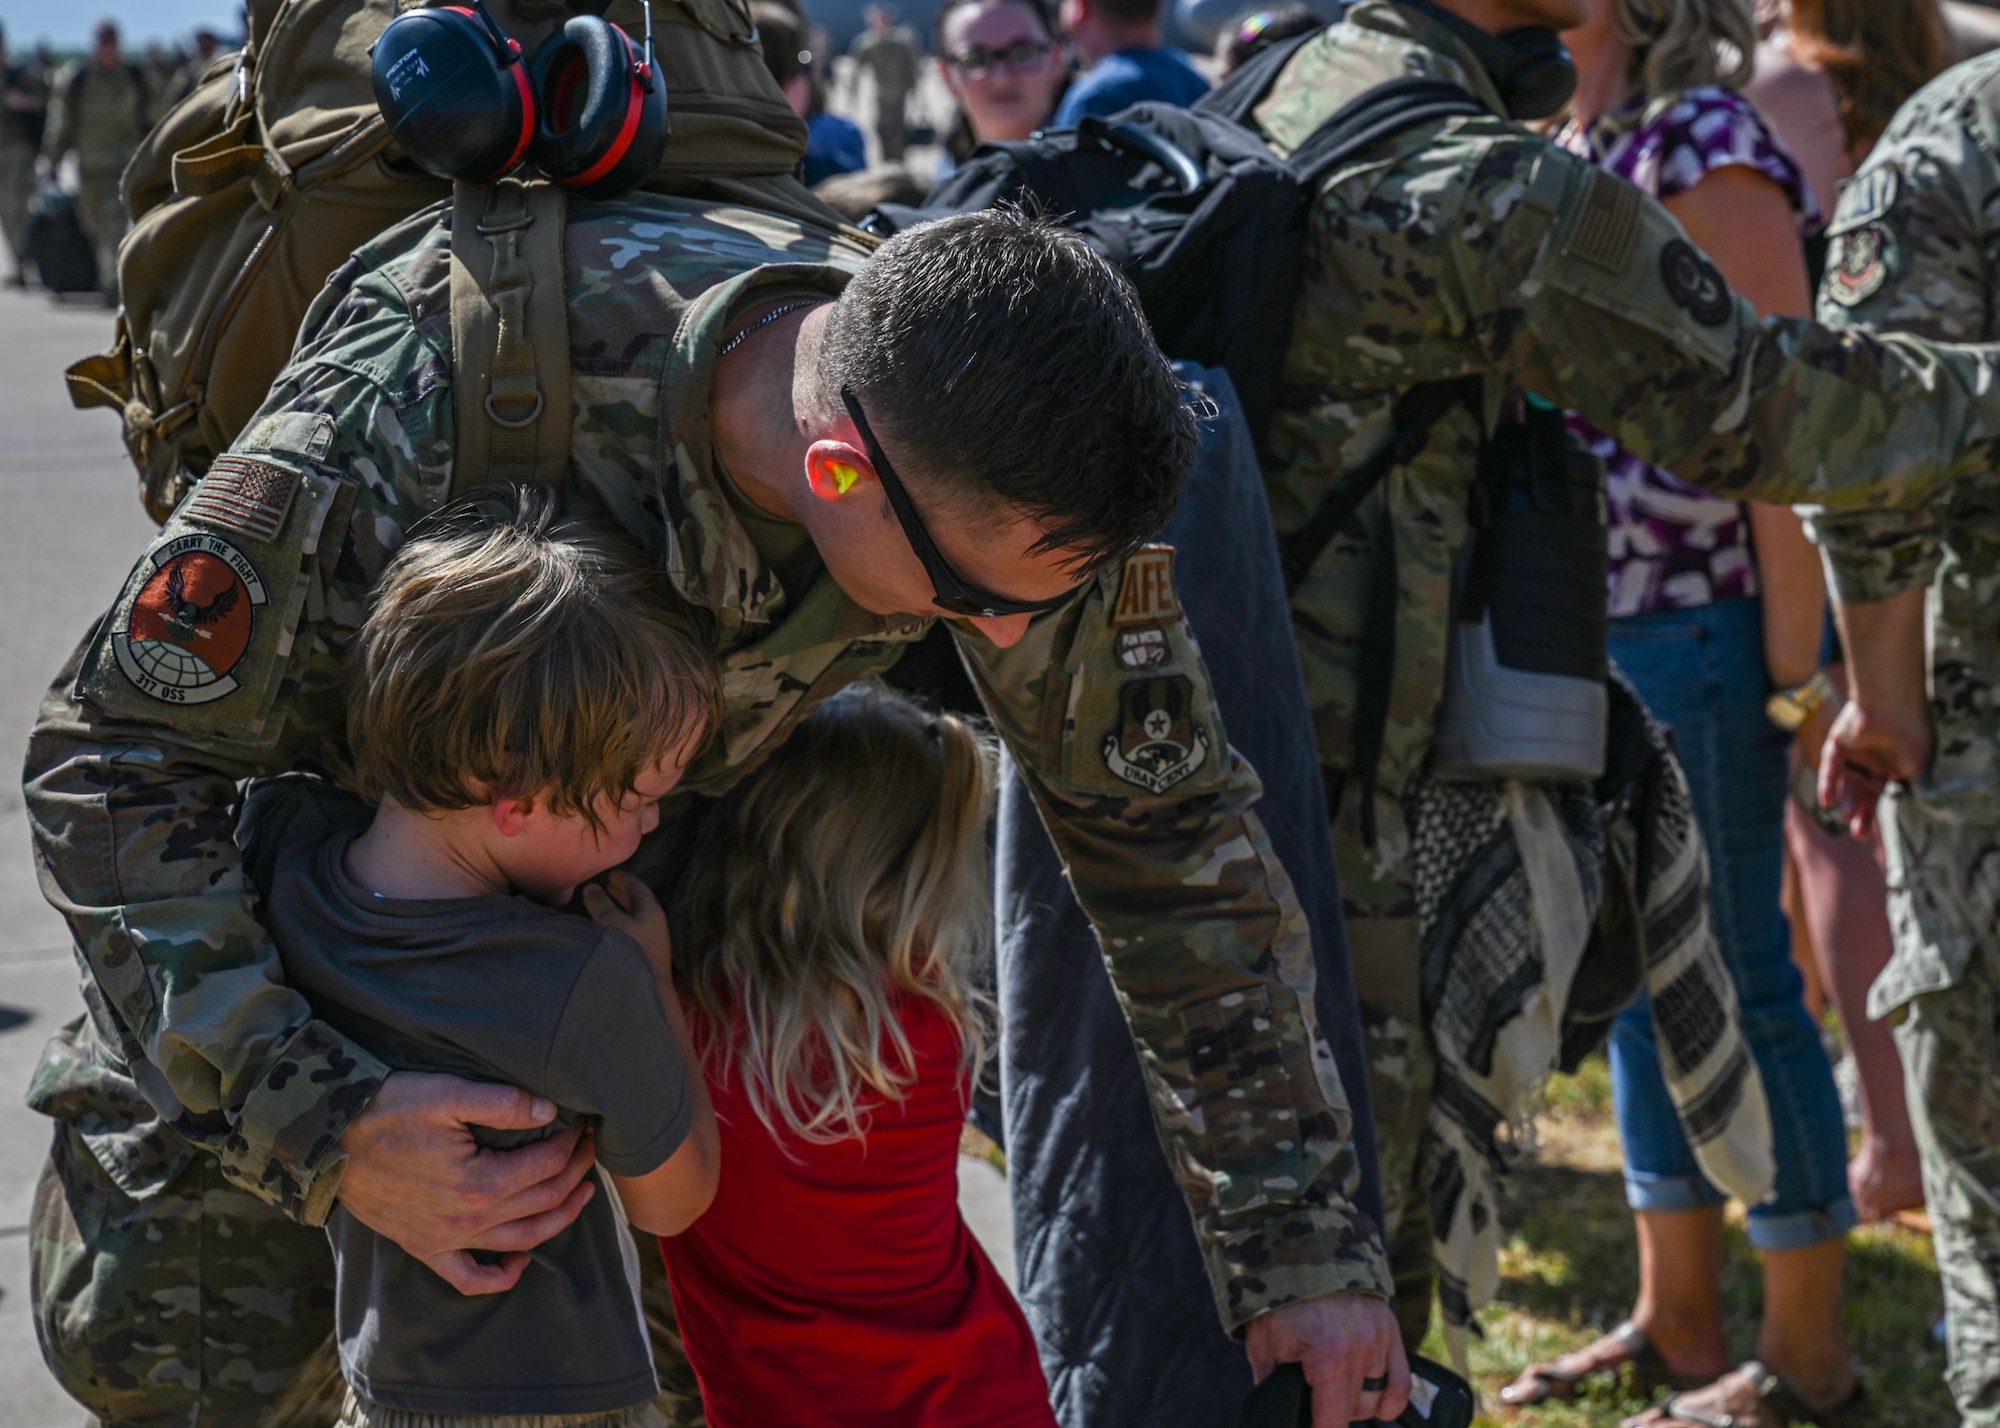 An Airman from the 317th Operational Support Squadron embraces loved ones.